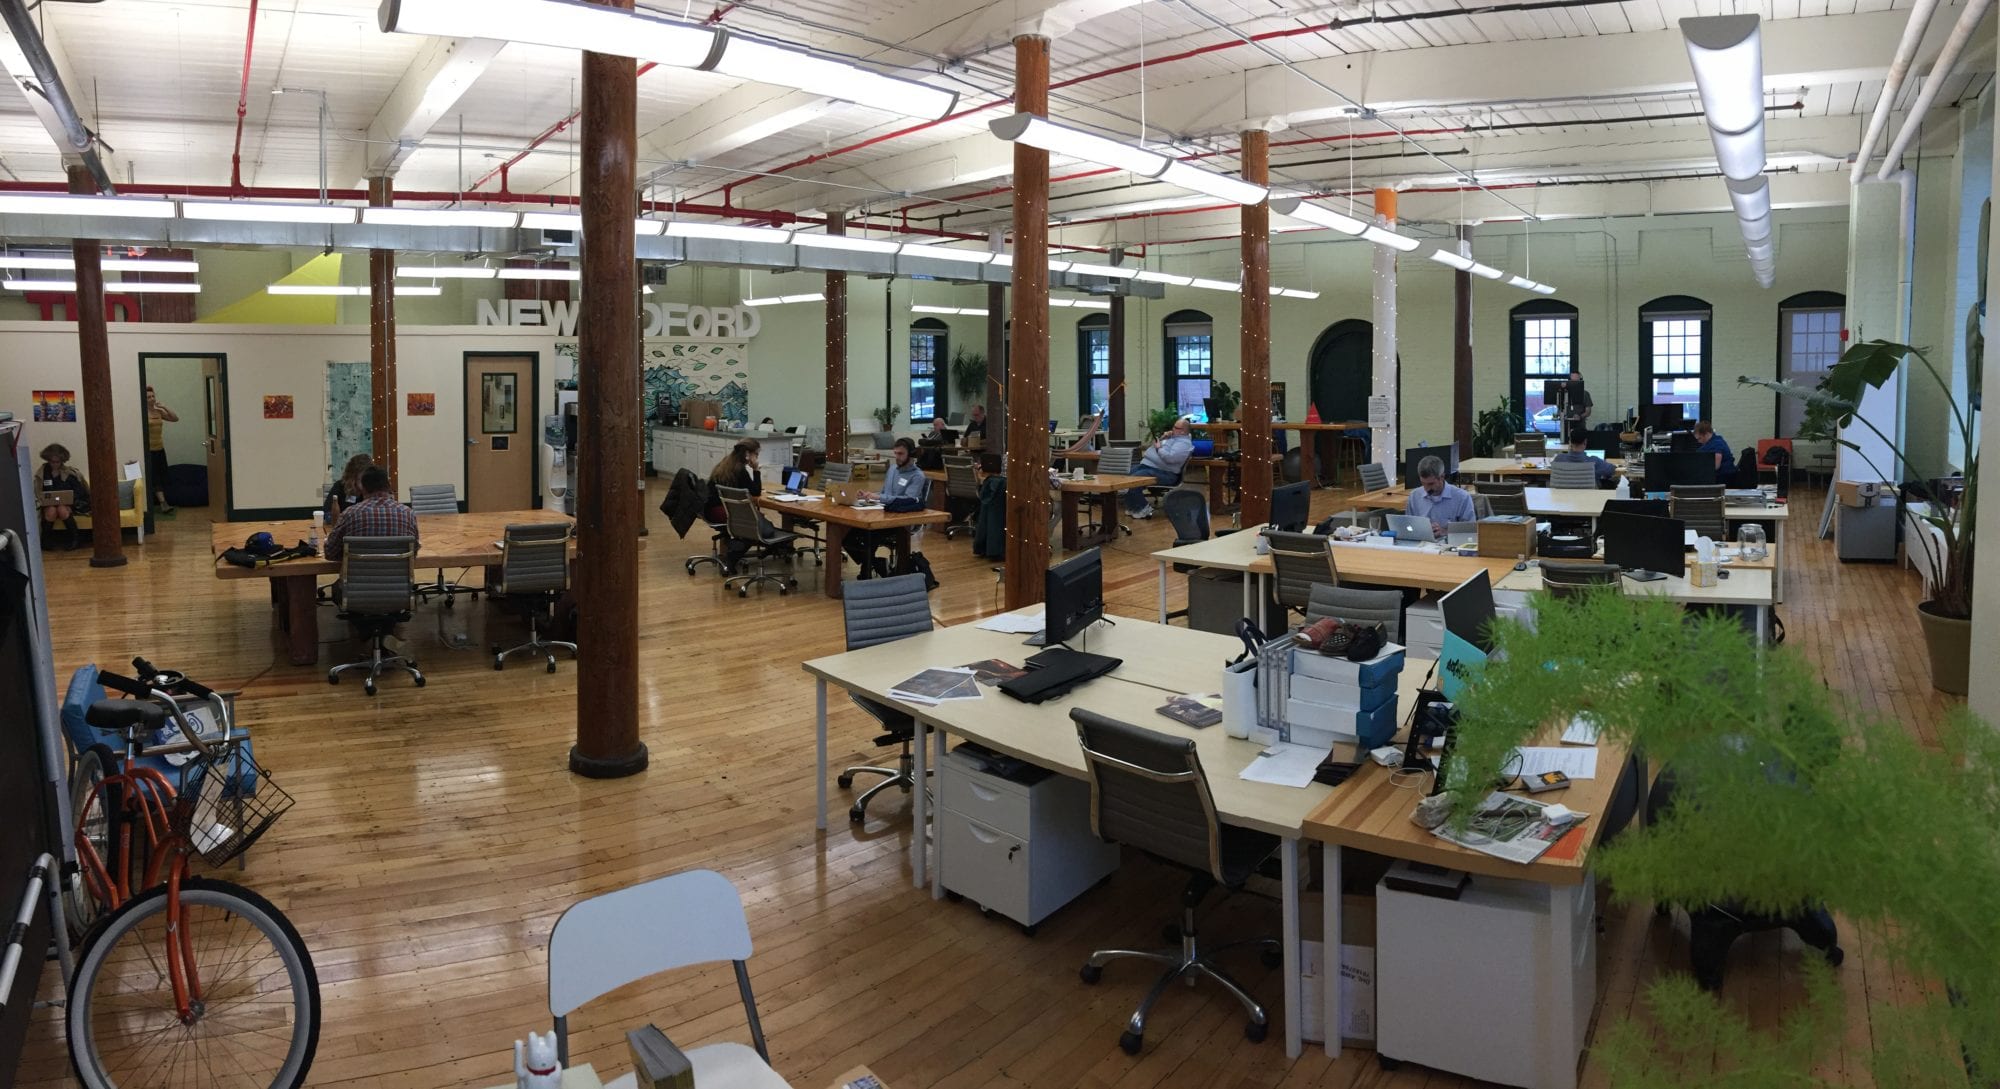 MAKERSPACES: Hives of creative activity, makerspaces and co-working spaces are thriving